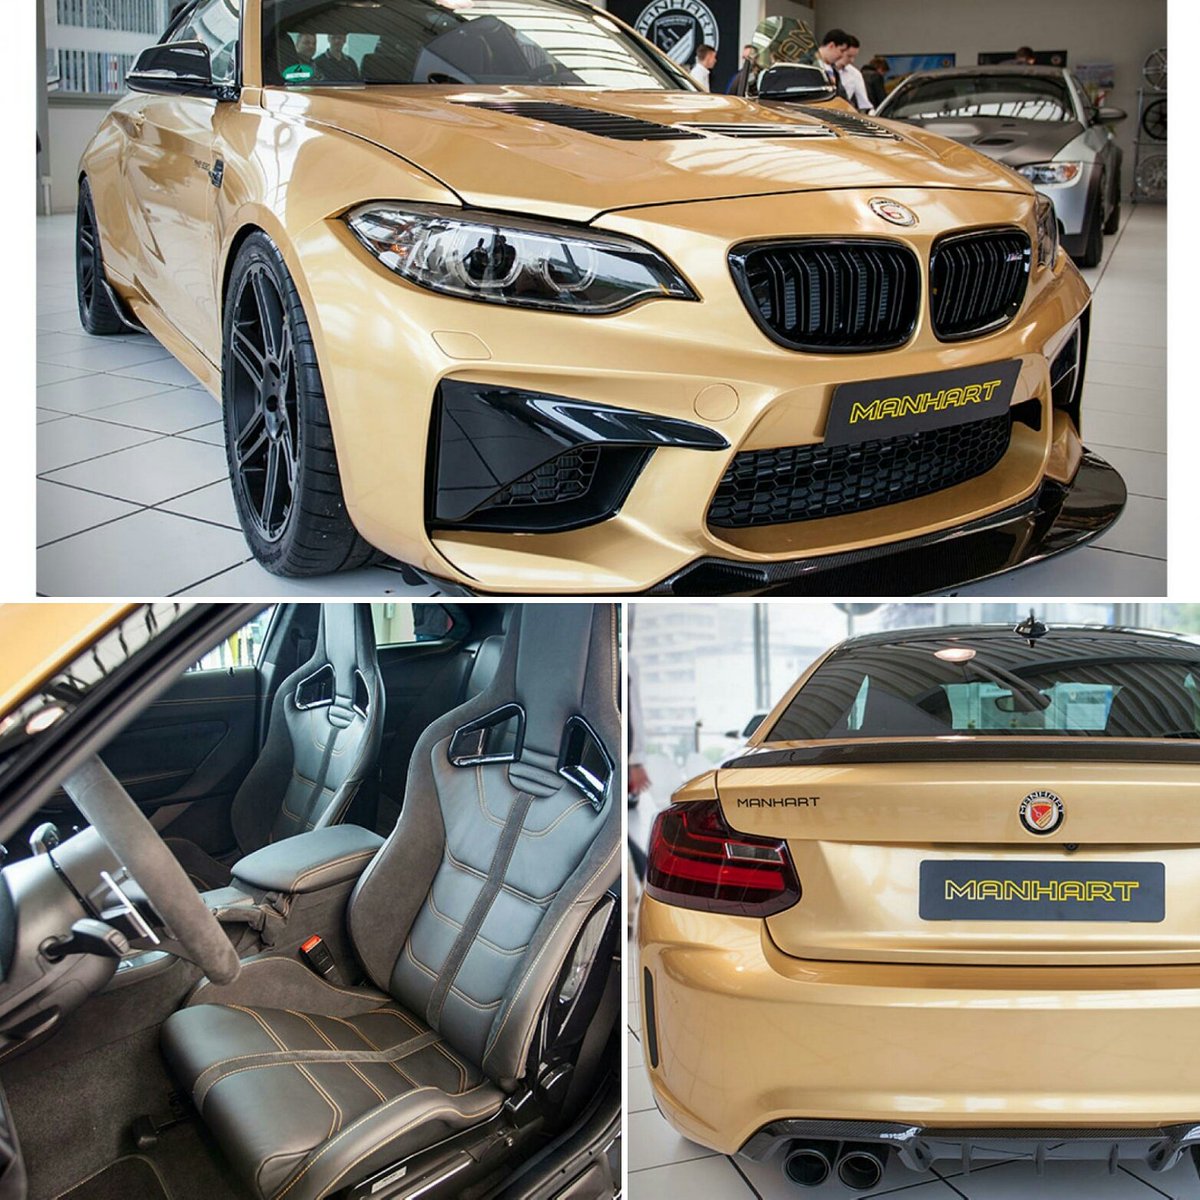 Driveitdaily בטוויטר This Is A Gold 621 Bhp Modified Bmw M2 Made By Manhart Ossun Sportscar Sportcar Supercar Supercars Cars